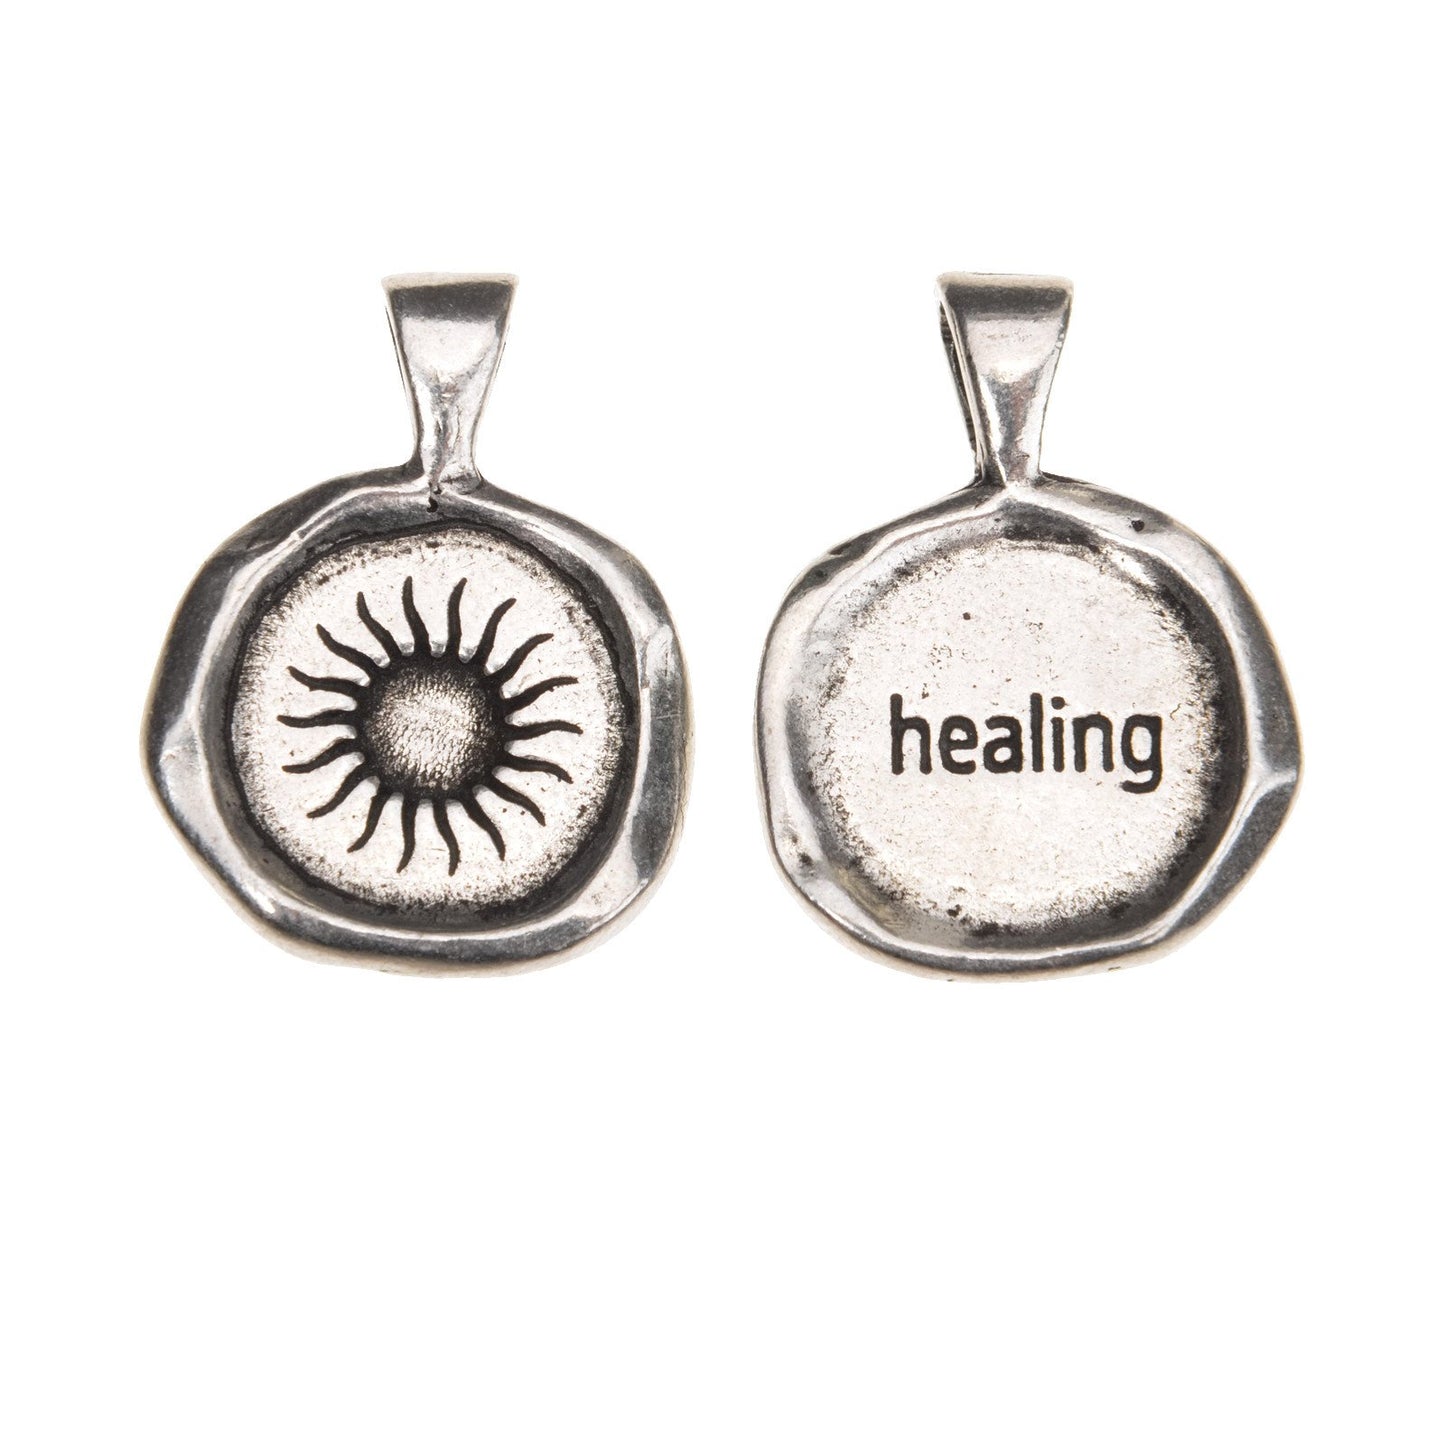 Healing Wax Seal front and back